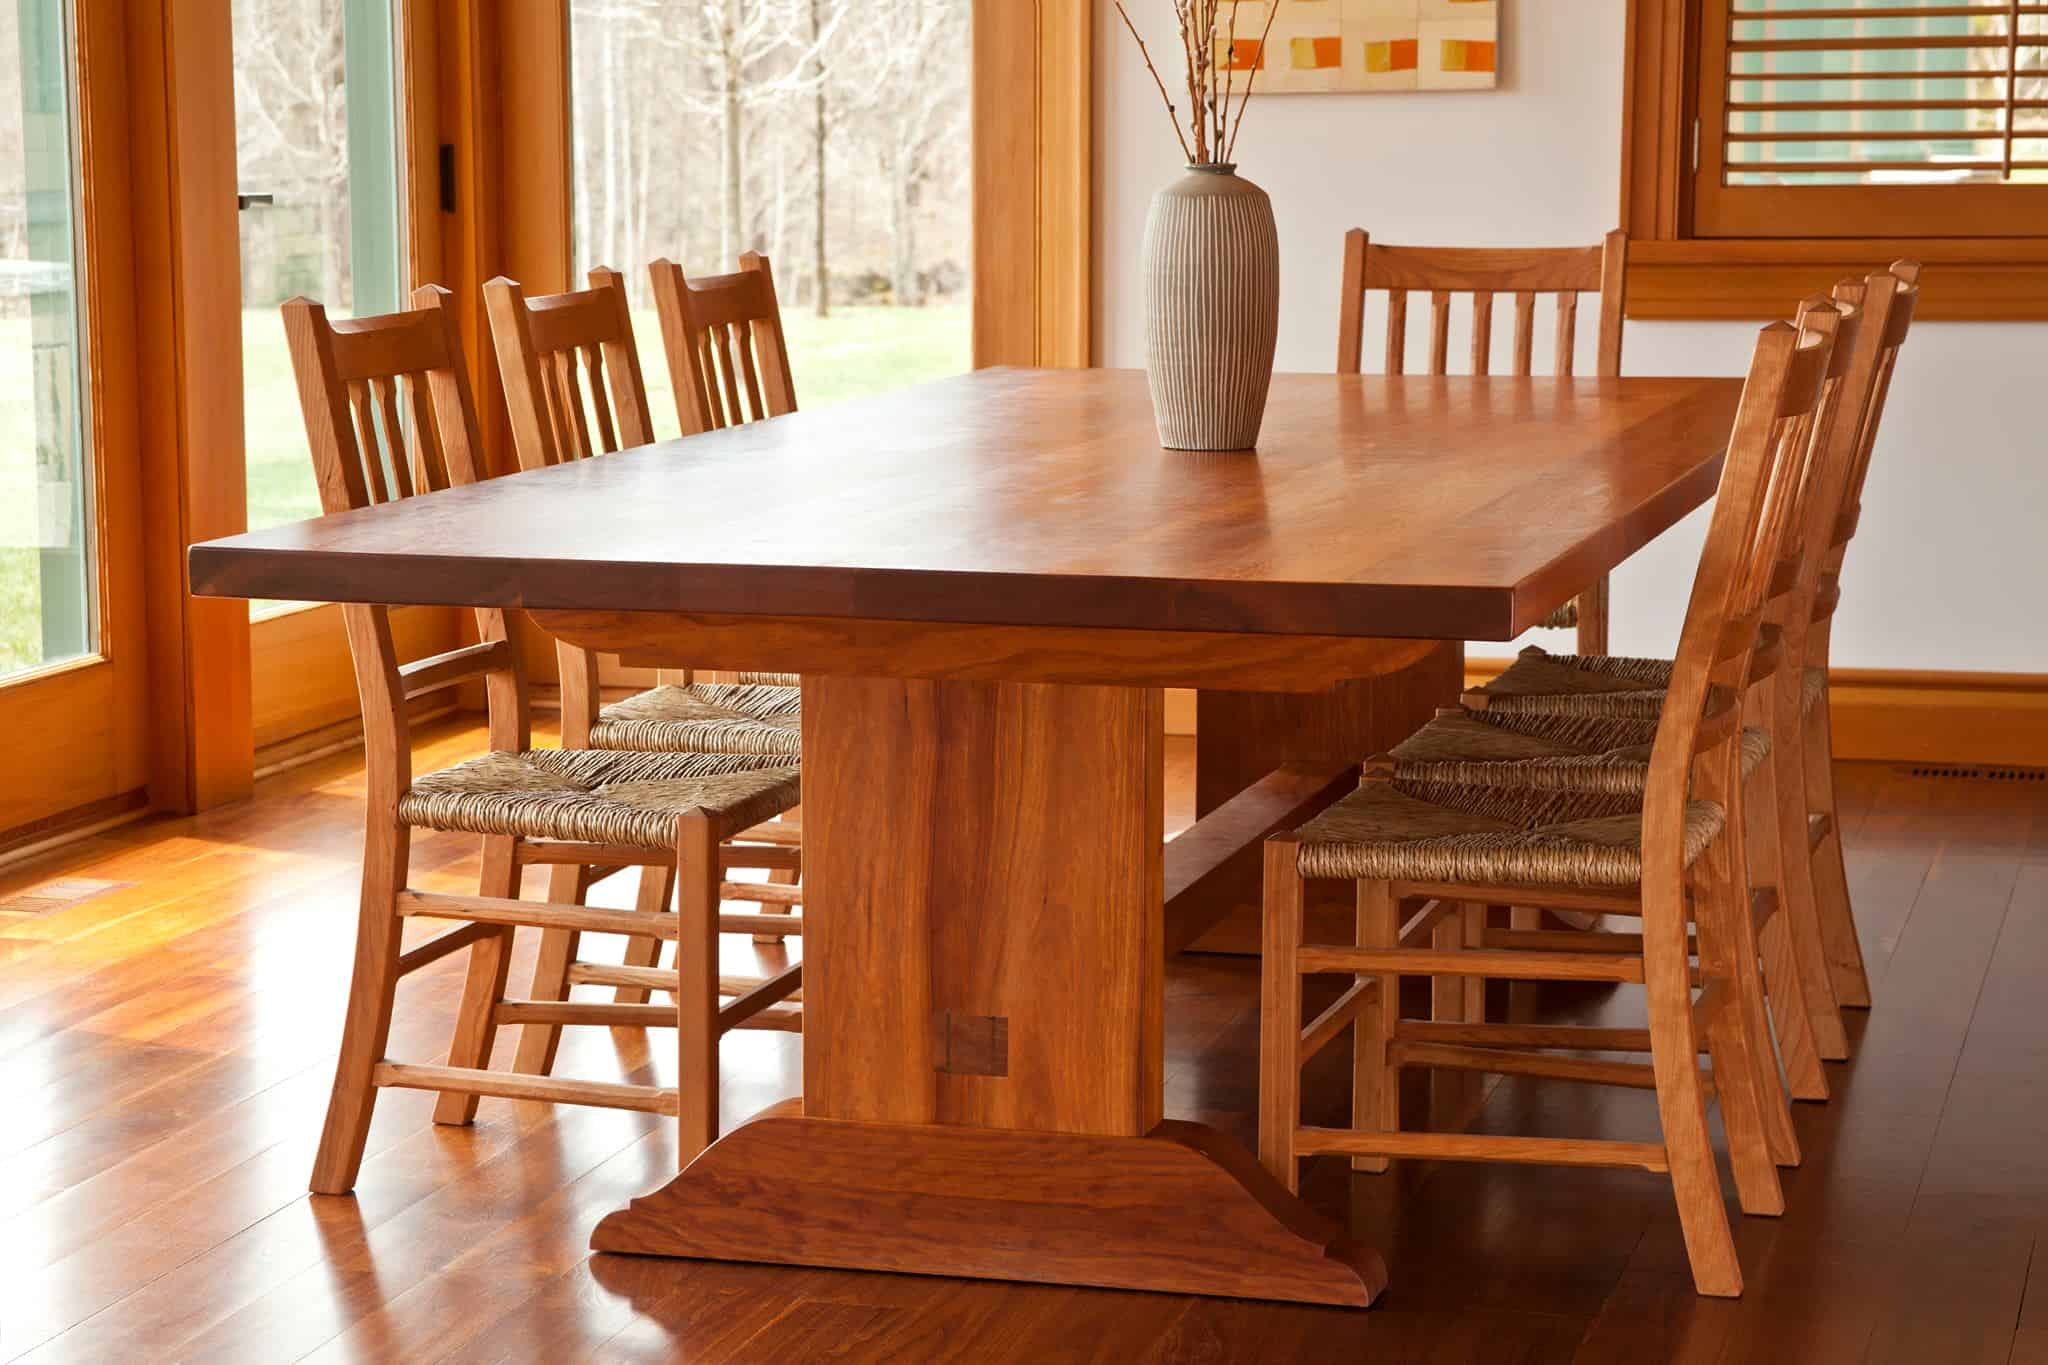 ShackletonThomas - Dining Table and Chairs